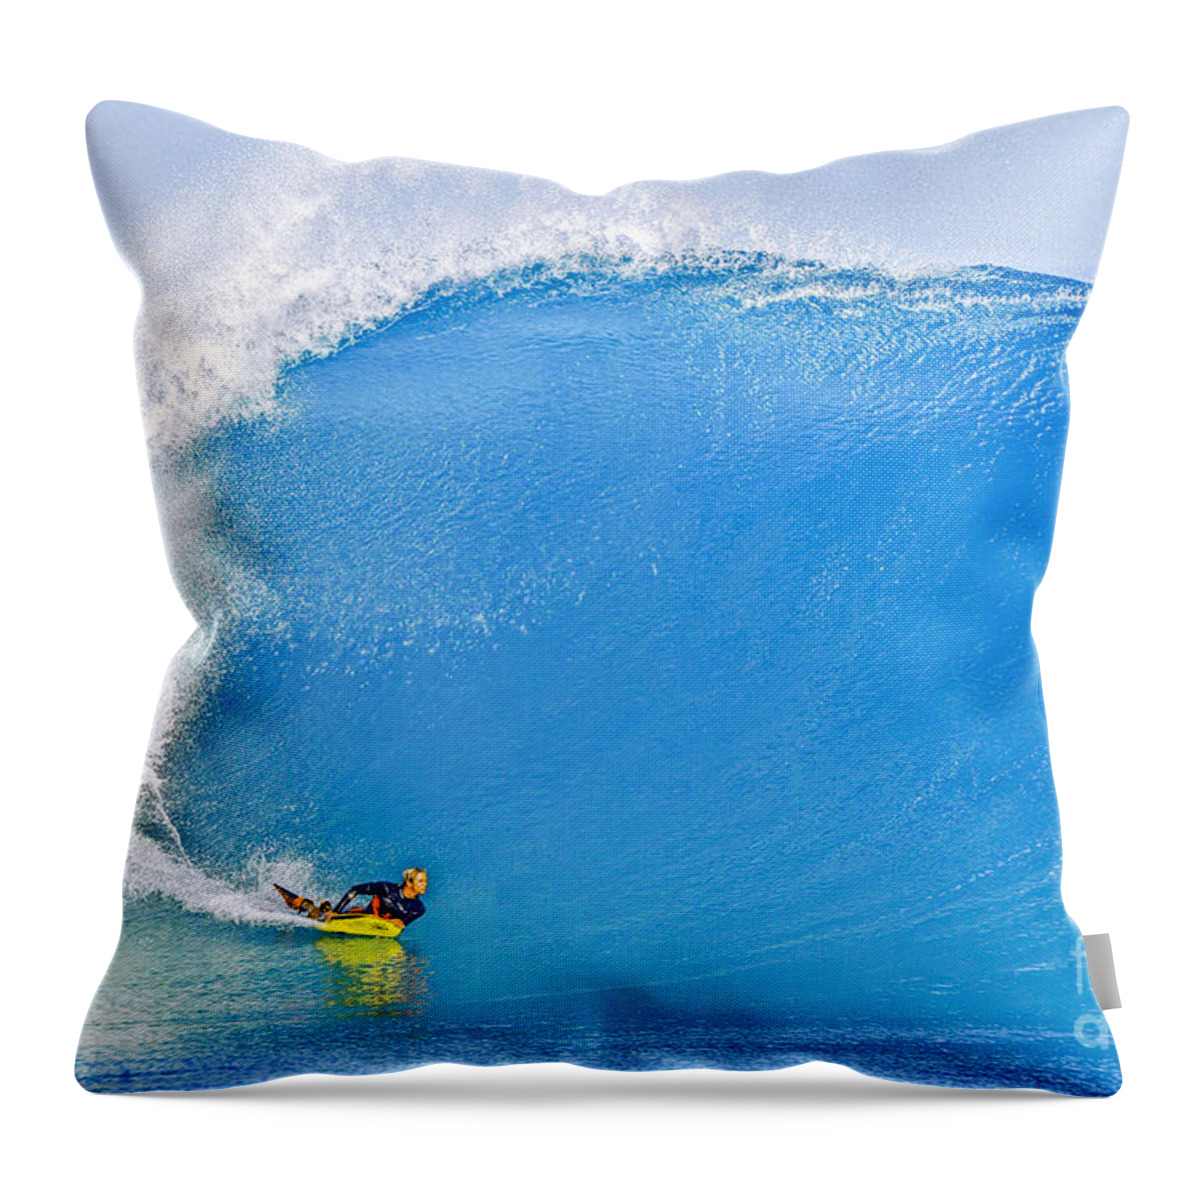 Banzai Pipeline Throw Pillow featuring the photograph Banzai Pipeline The Perfect Wave by Aloha Art